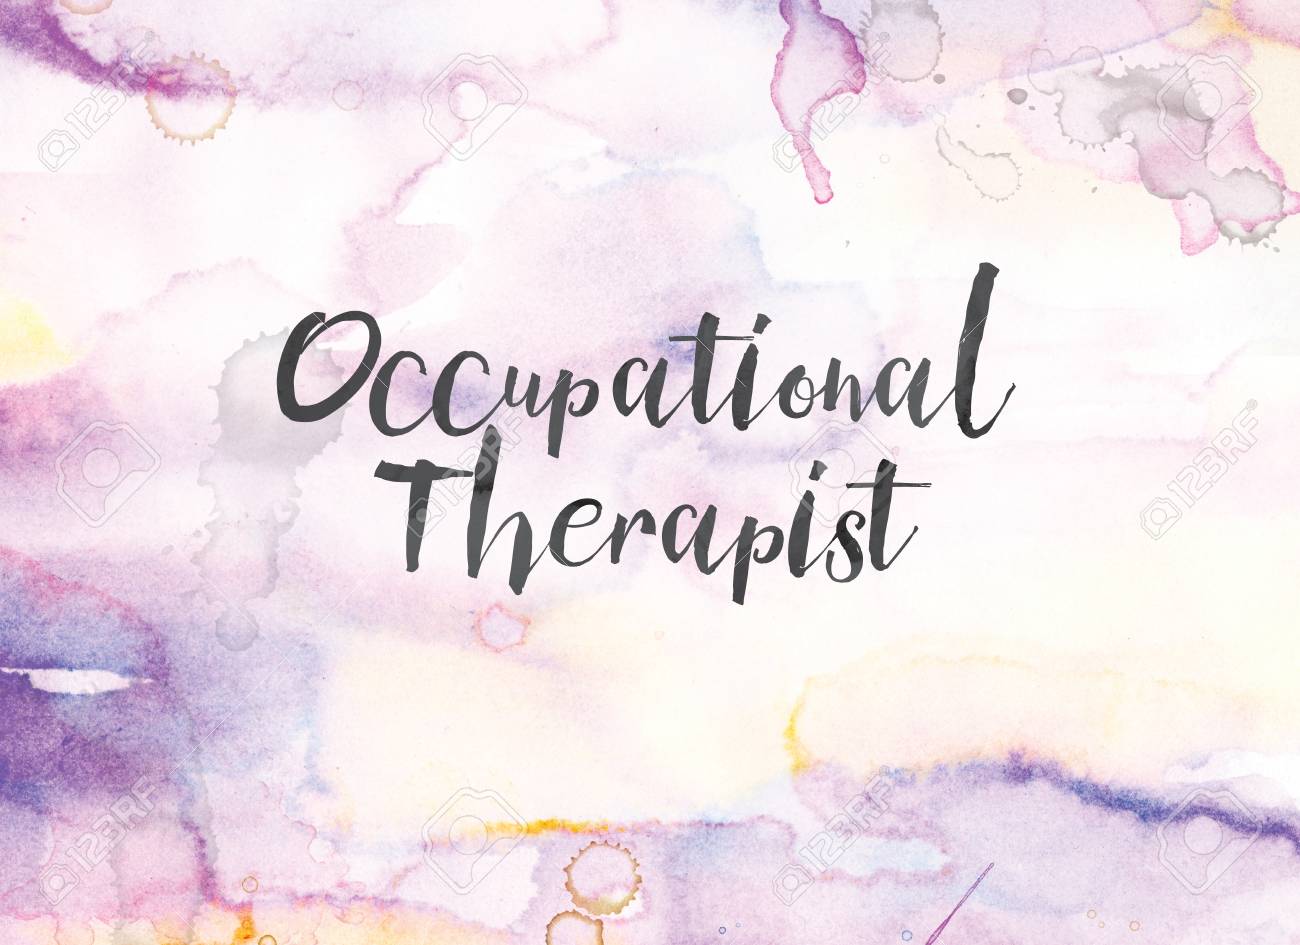 The Words Occupational Therapist Concept And Theme Written In